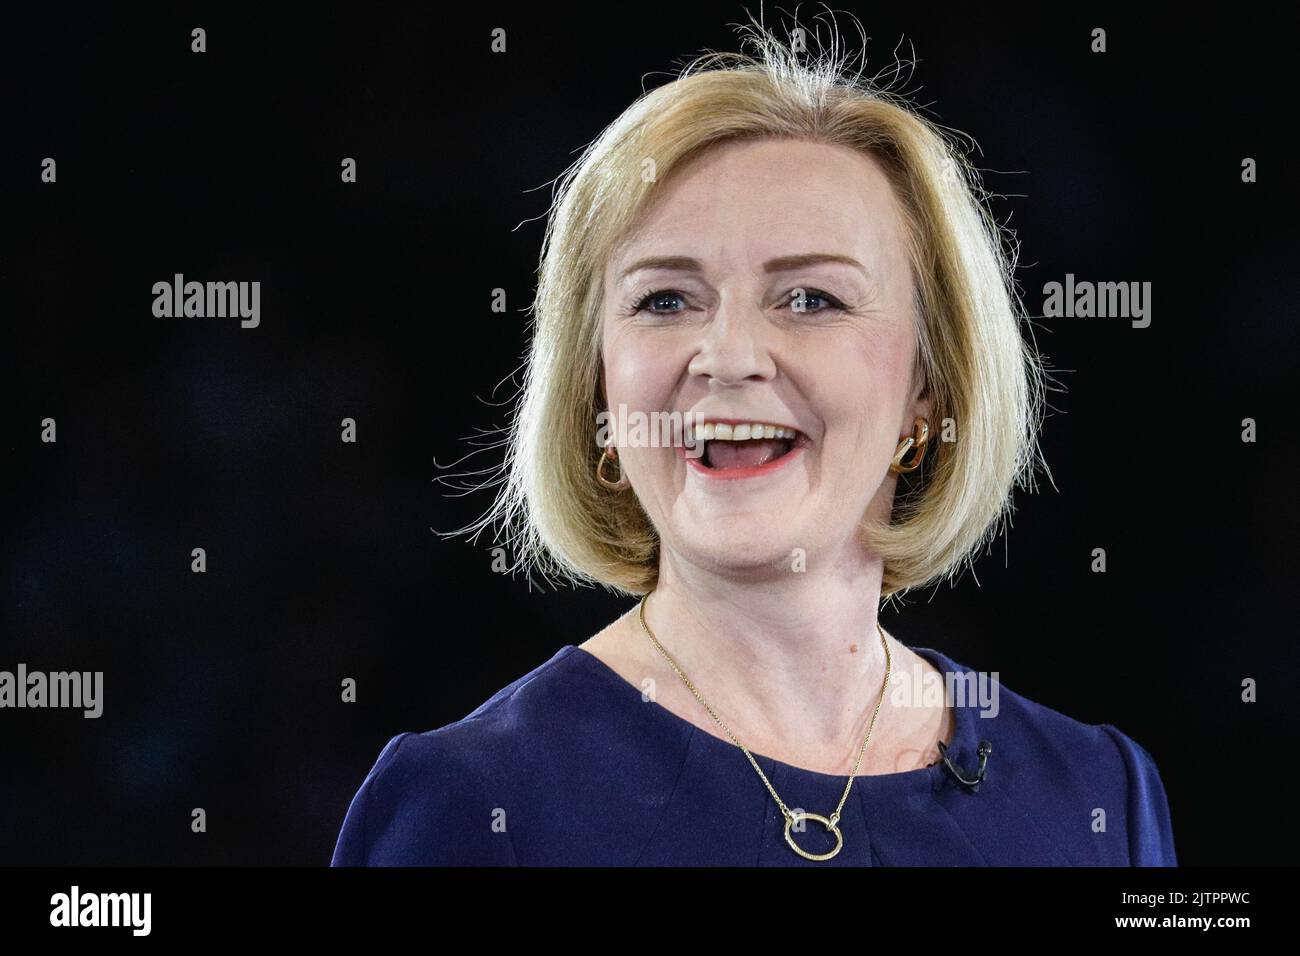 London, UK. 31st Aug, 2022. Liz Truss close up of face, smiling, looks confident. The final hustings in the Conservative Party leadership race, held at Wembley Arena, sees Liz Truss and Rishi Sunak compete to lead the party and become the next Prime Minister. Credit: Imageplotter/Alamy Live News Stock Photo